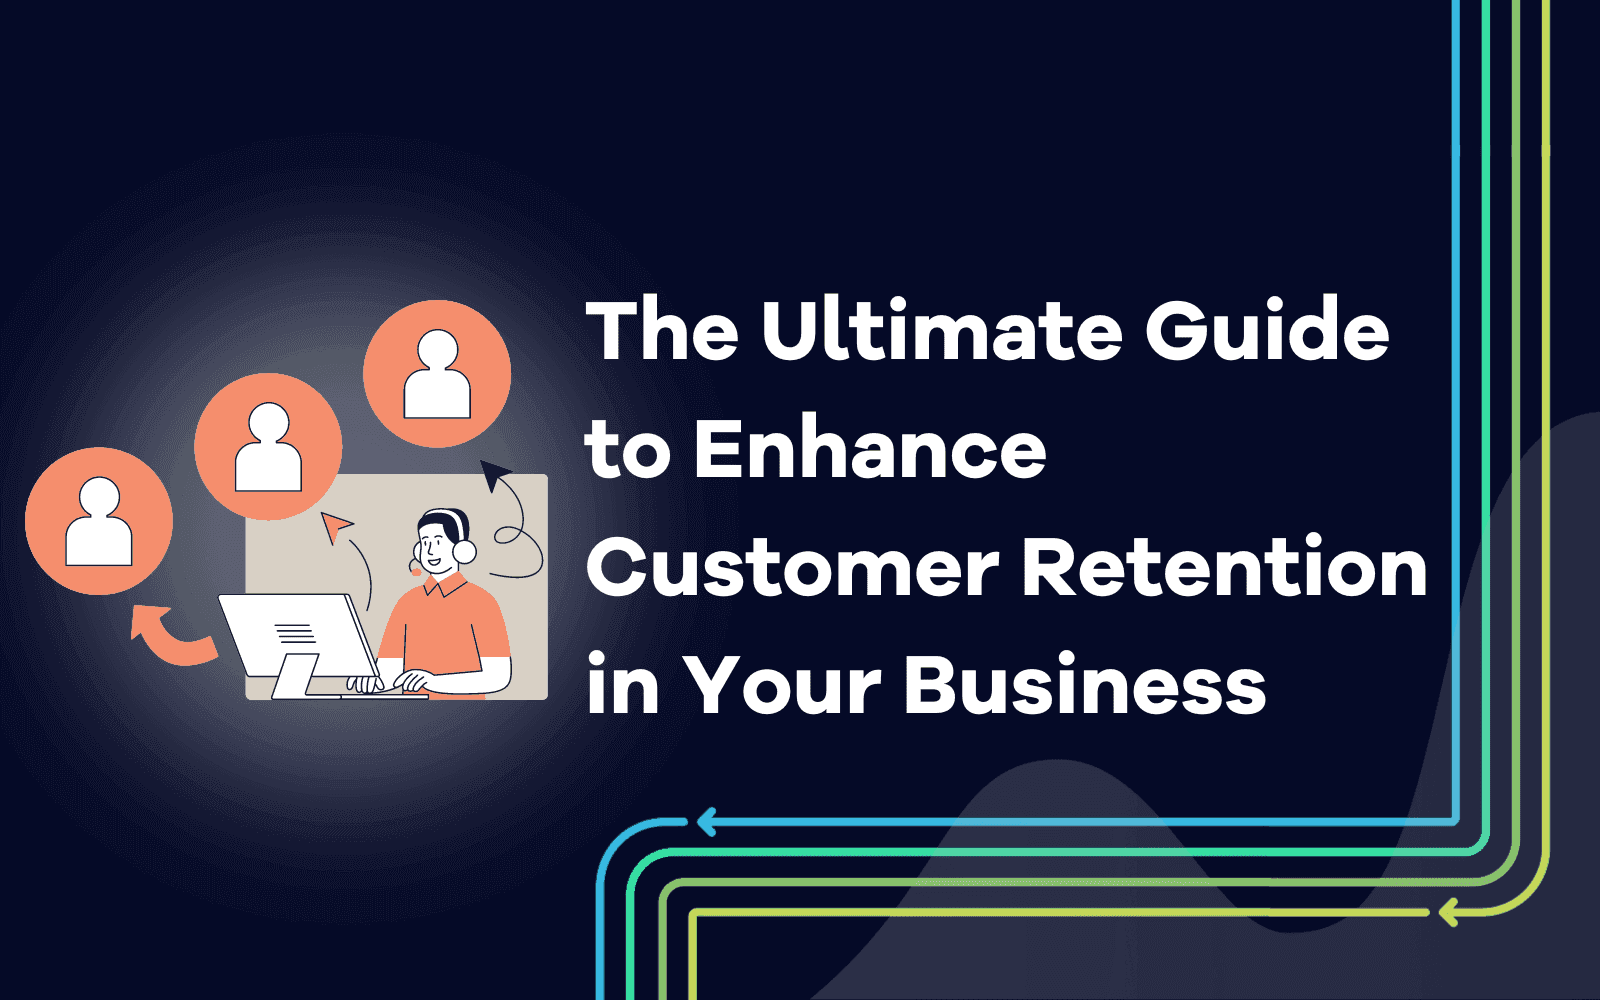 The Ultimate Guide to Enhance Customer Retention in Your Business